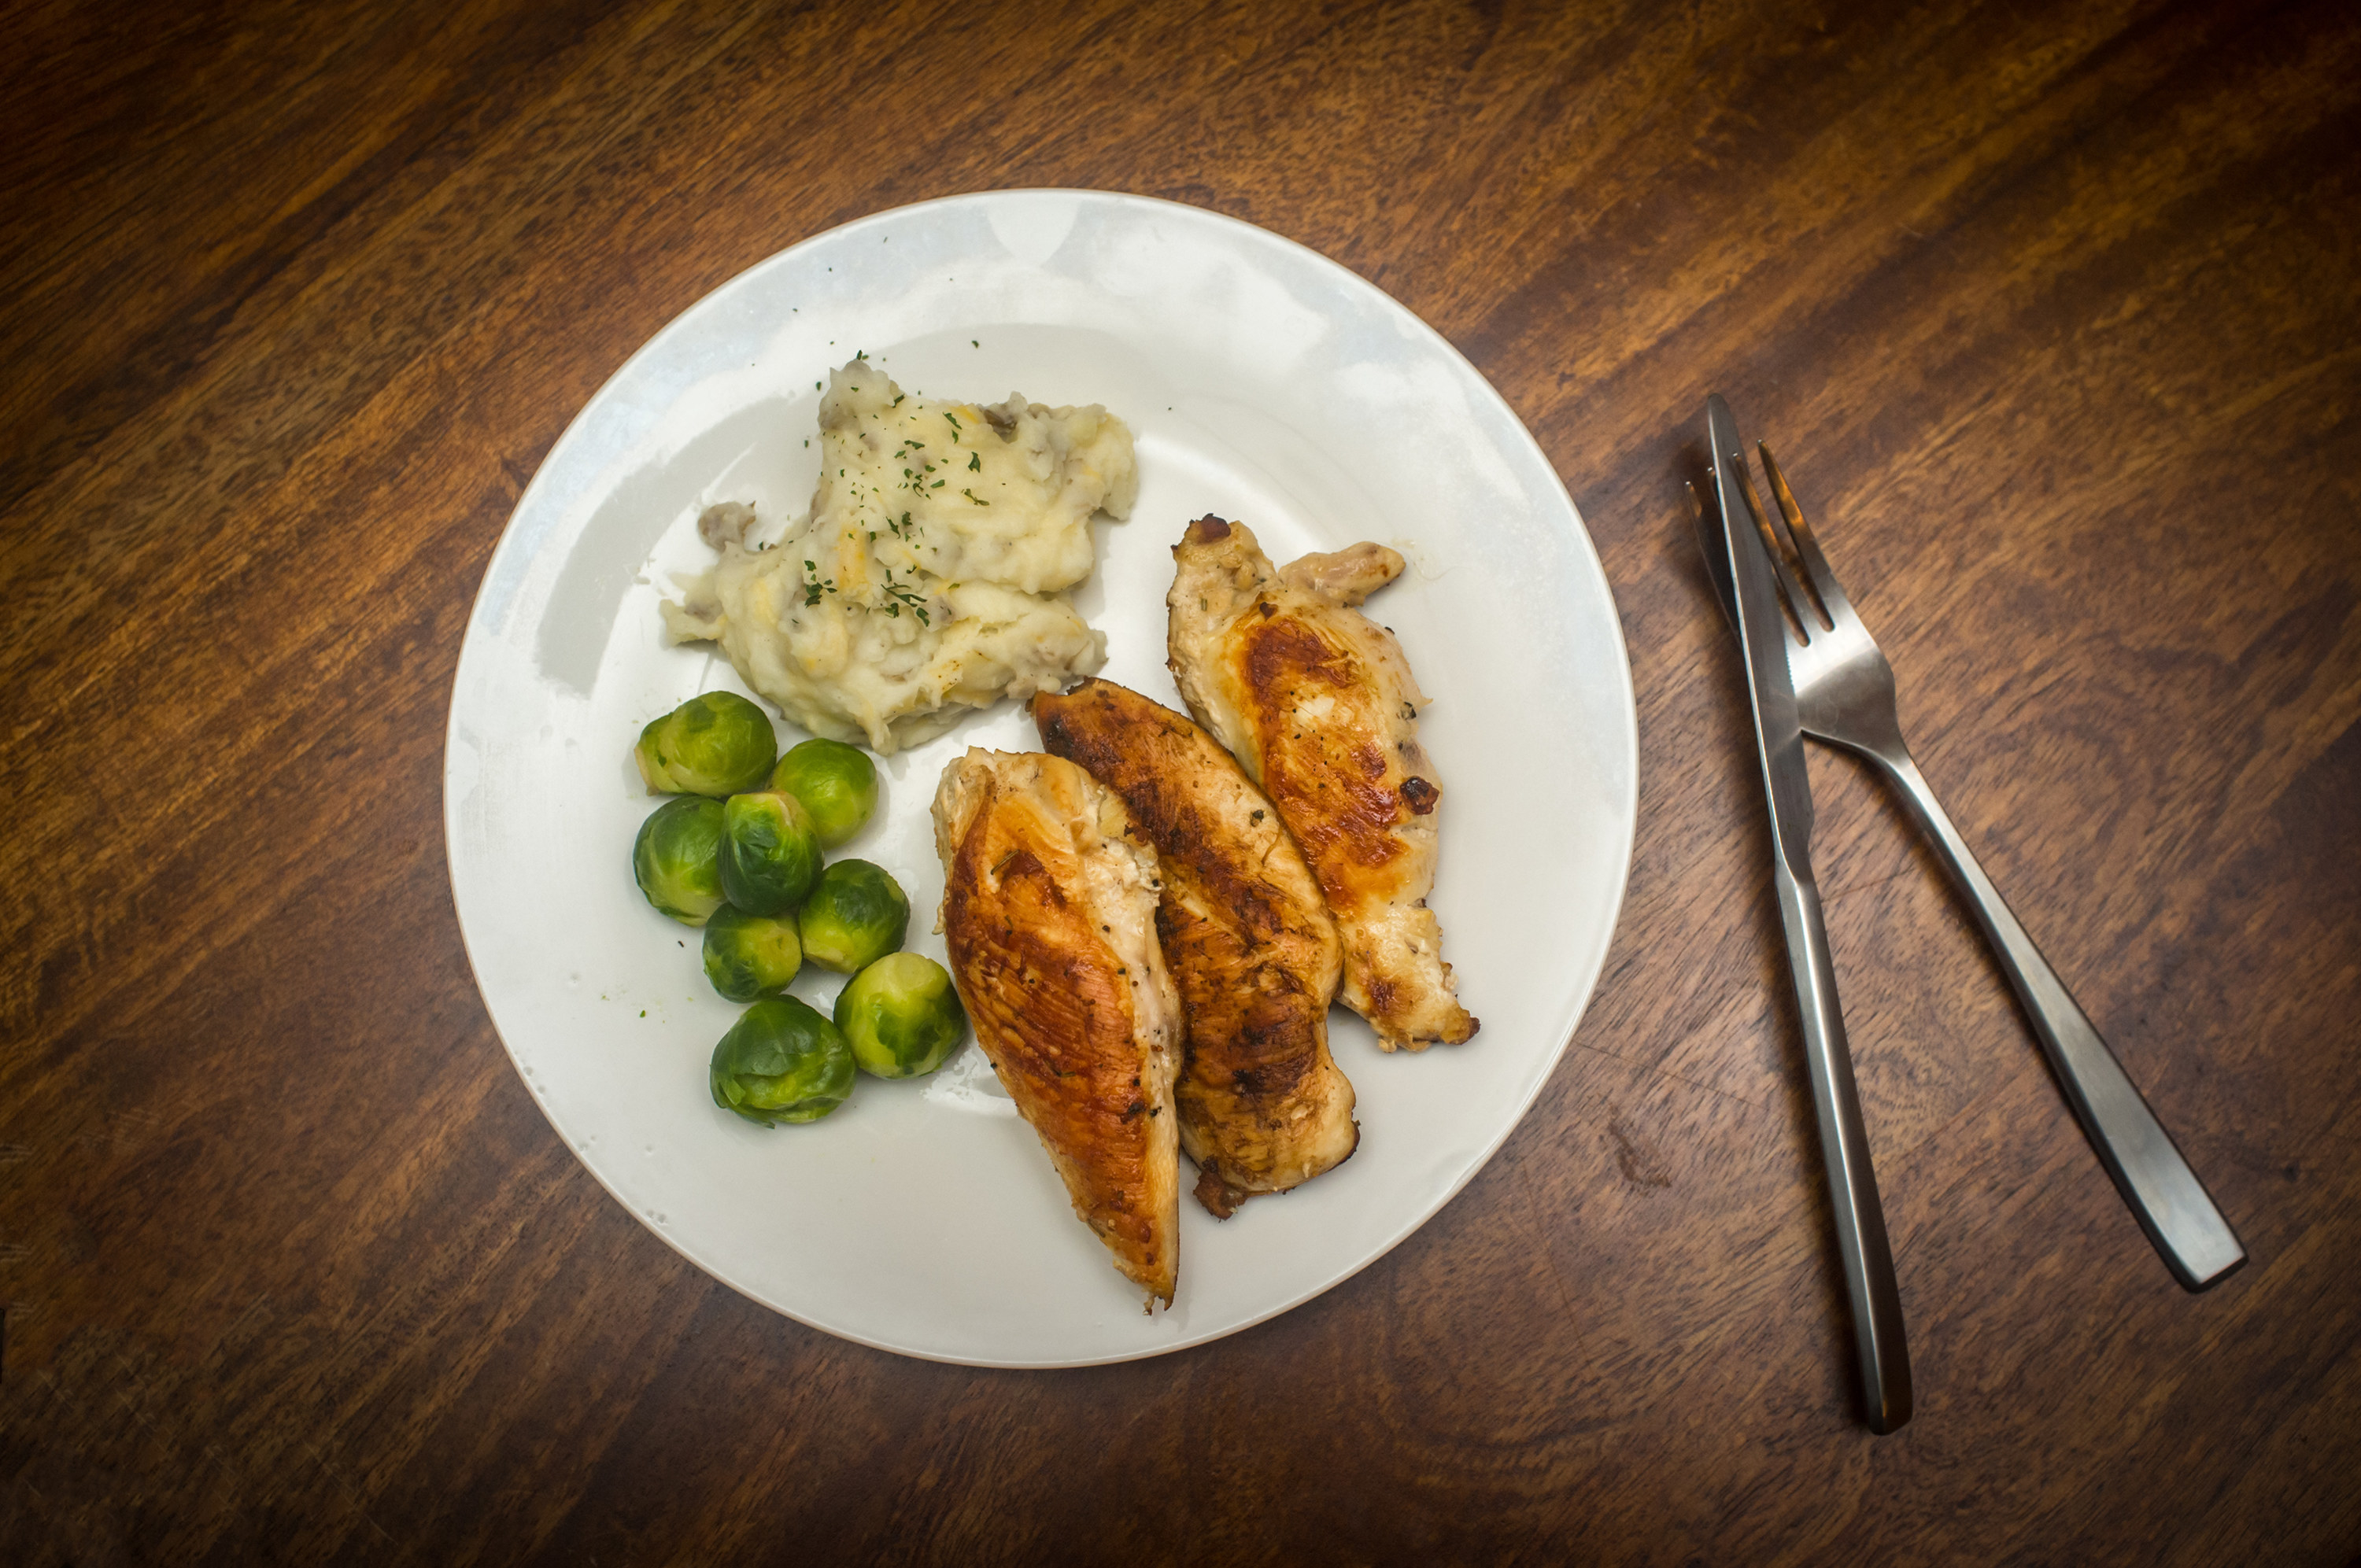 Chicken tenders with brussel sprouts and mashed potatoes